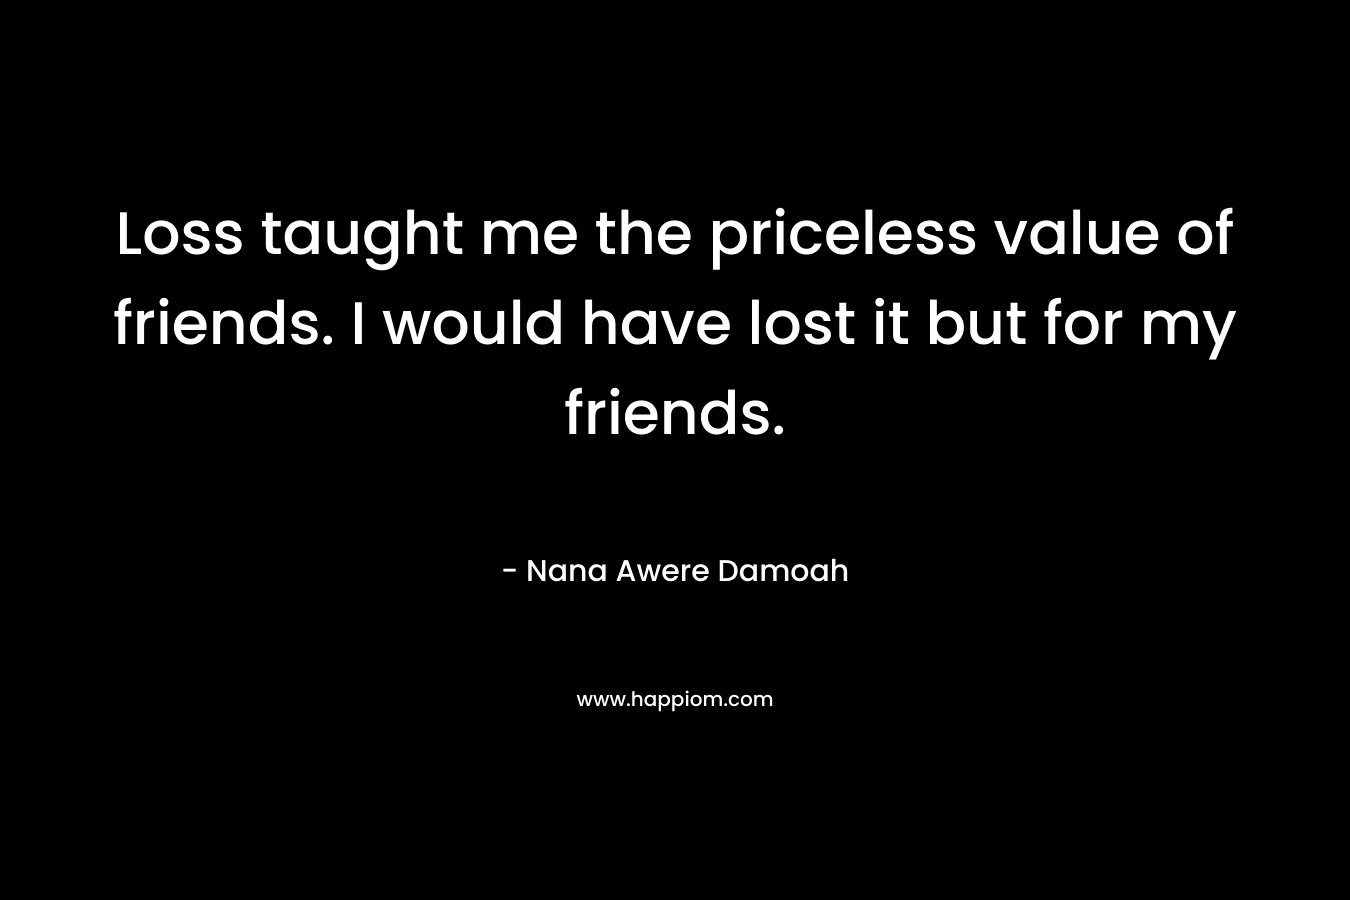 Loss taught me the priceless value of friends. I would have lost it but for my friends. – Nana Awere Damoah